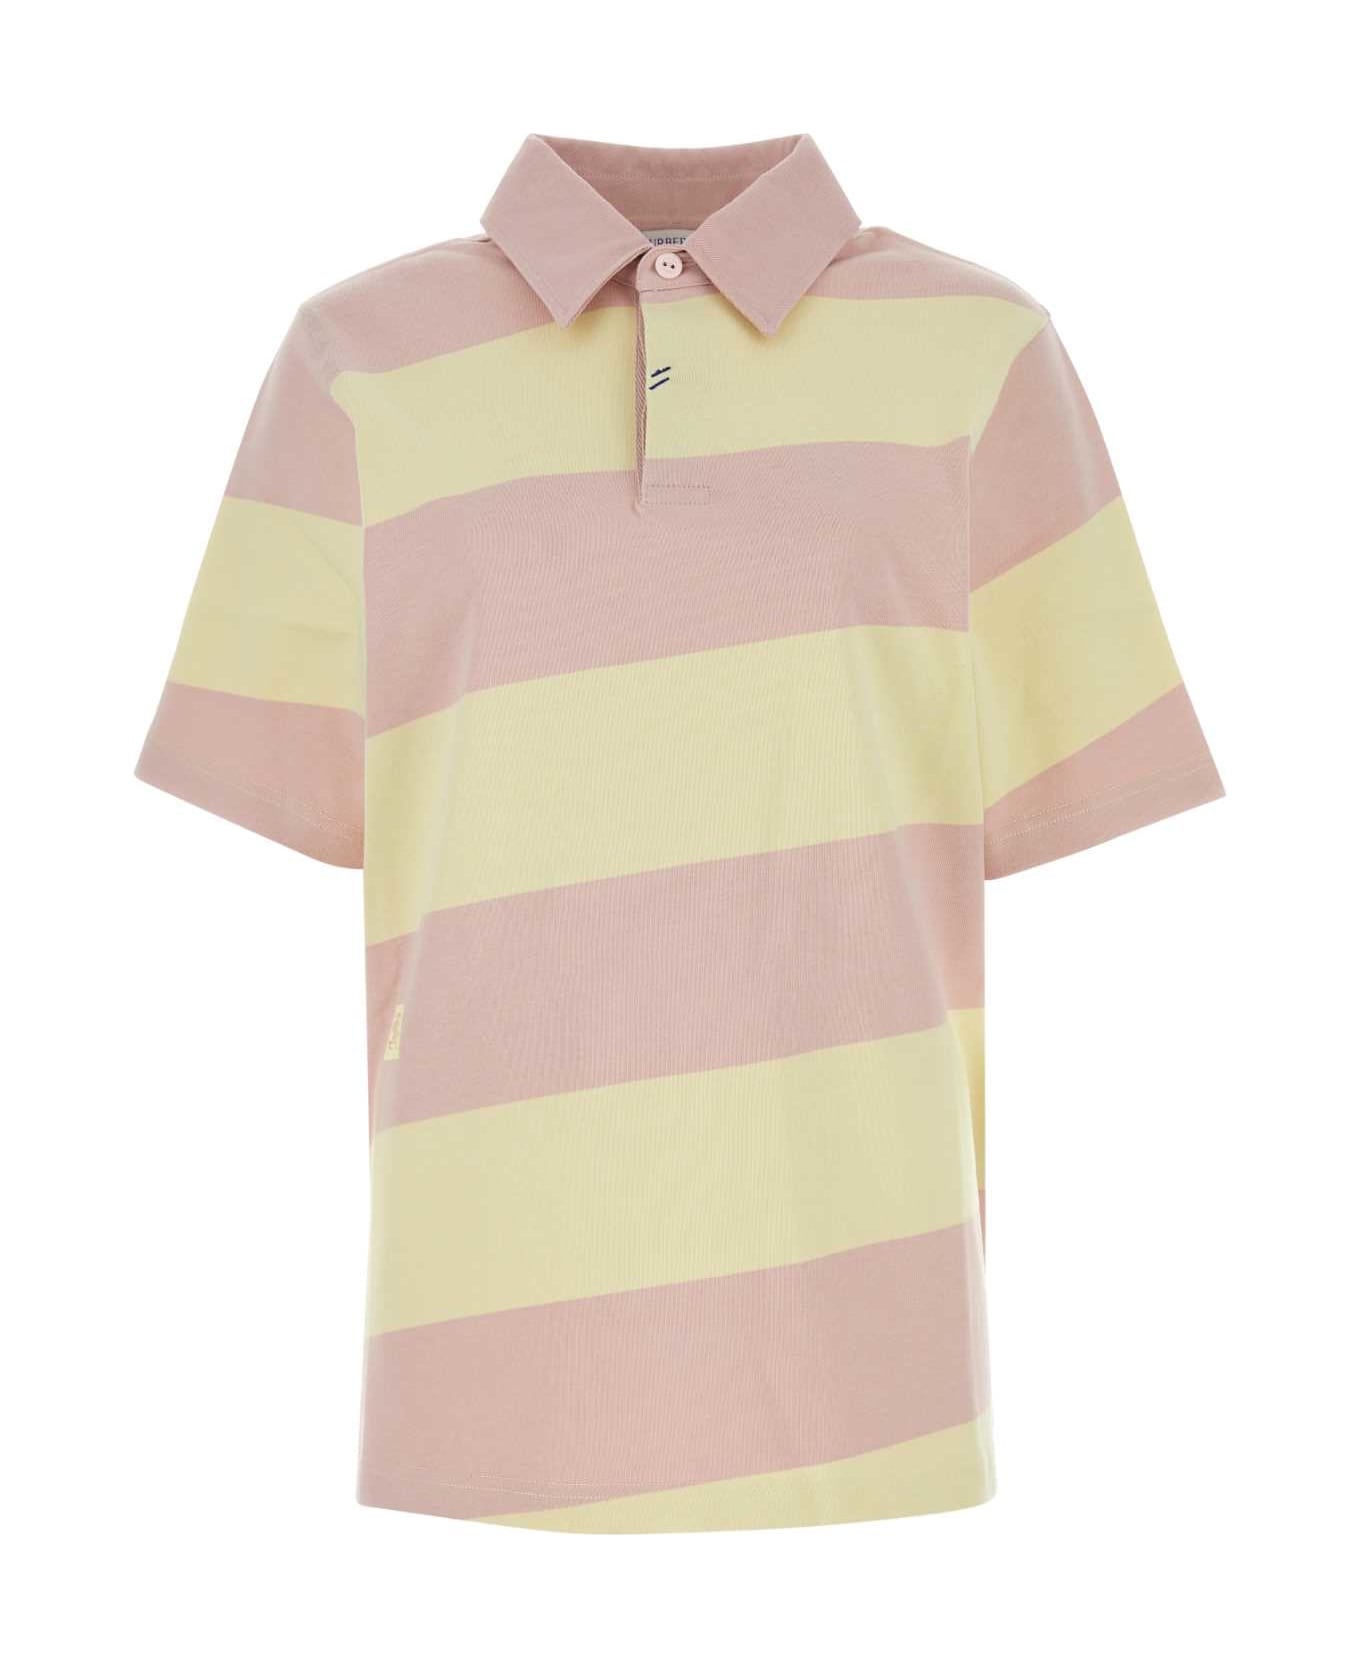 Burberry Embroidered Cotton Polo Shirt - CAMEOIPPATTERN ポロシャツ